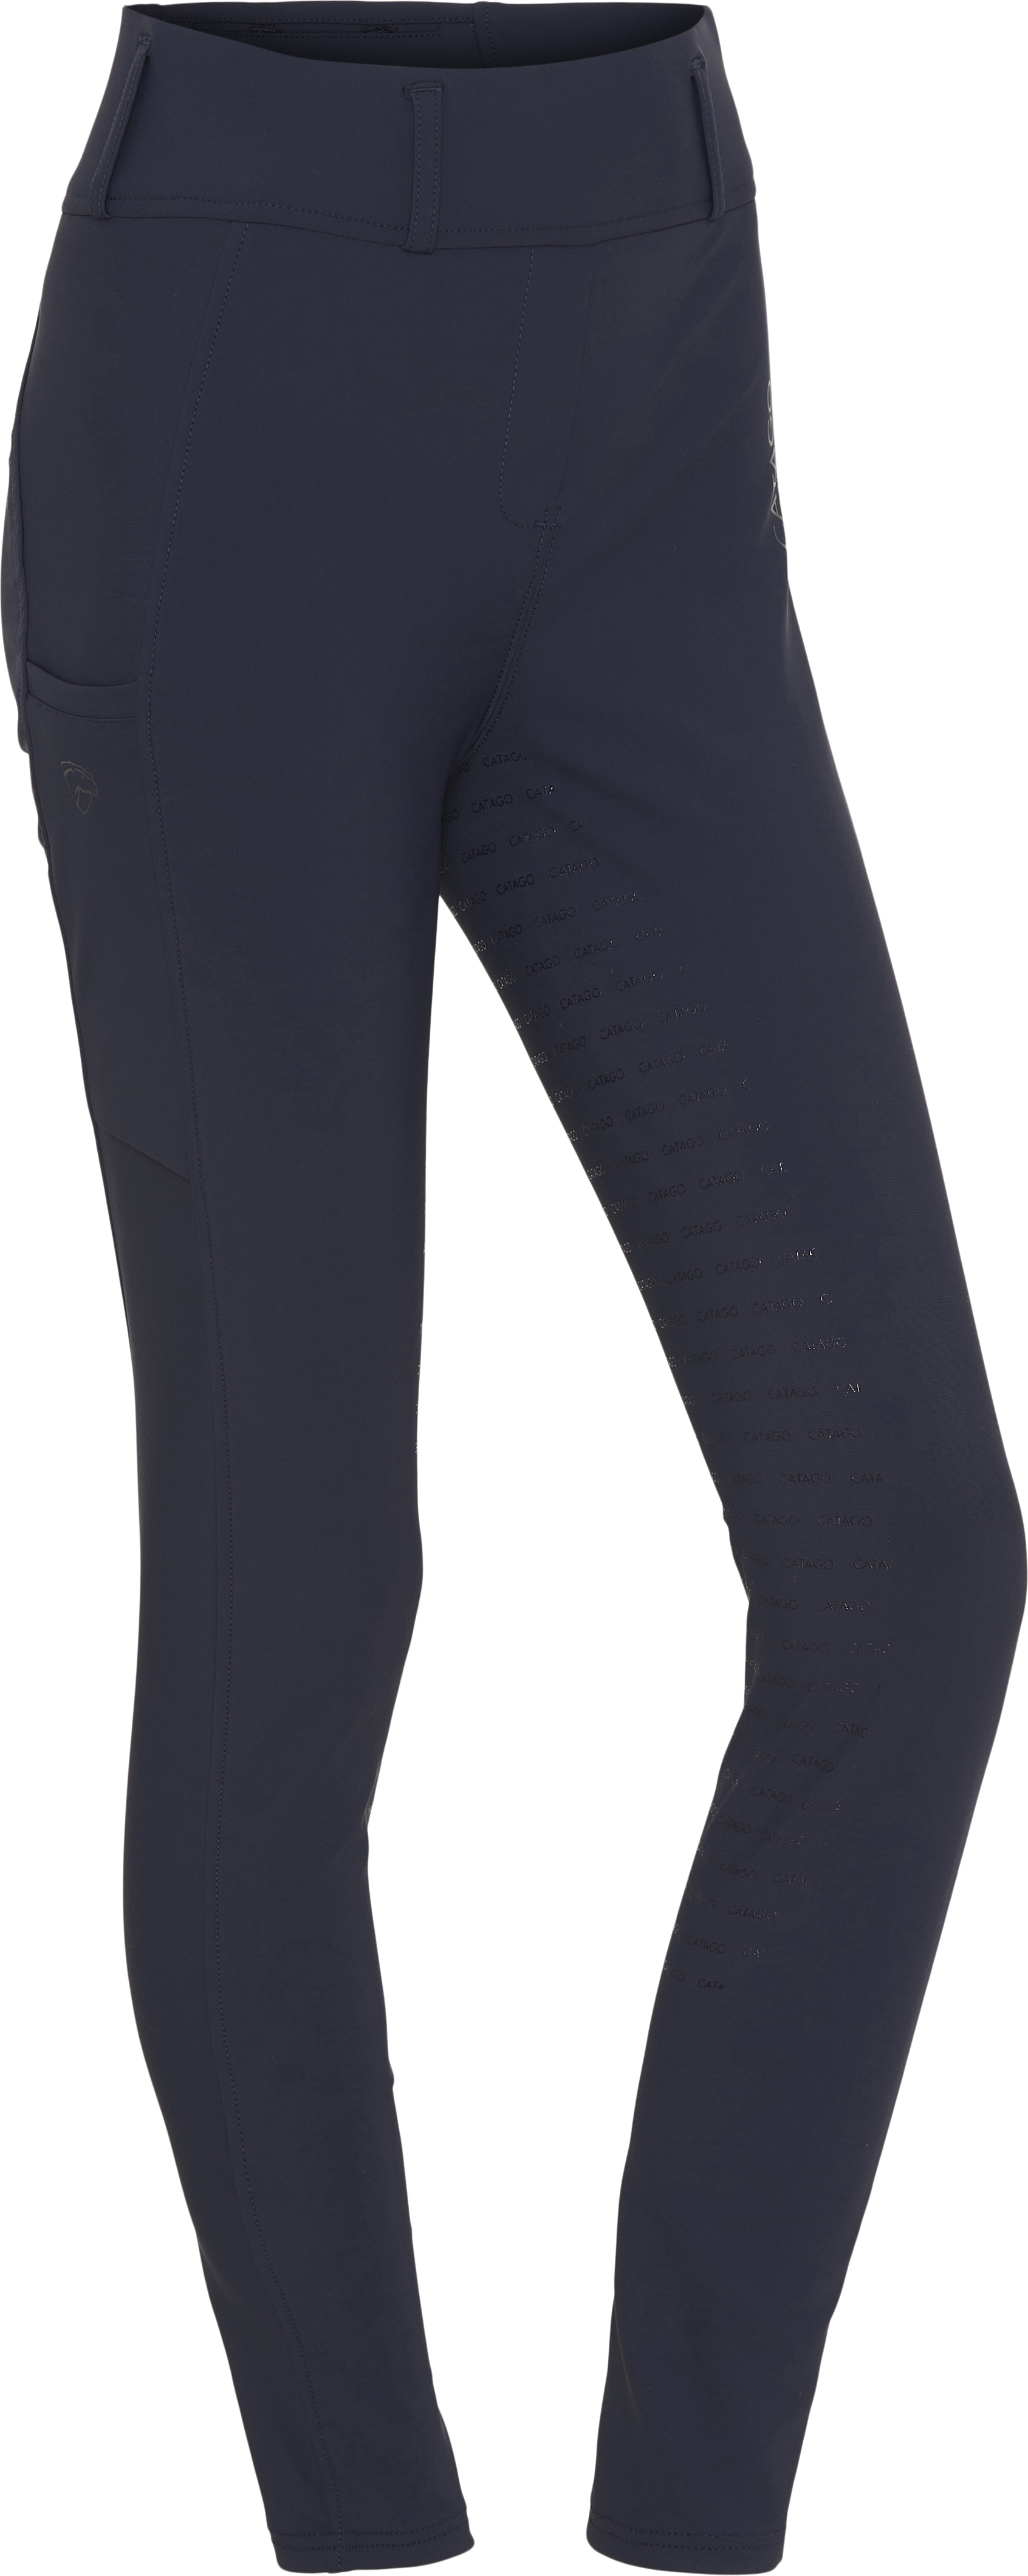 CATAGO River Tights Fullgrip With Belt Loops - Navy (S), Catago